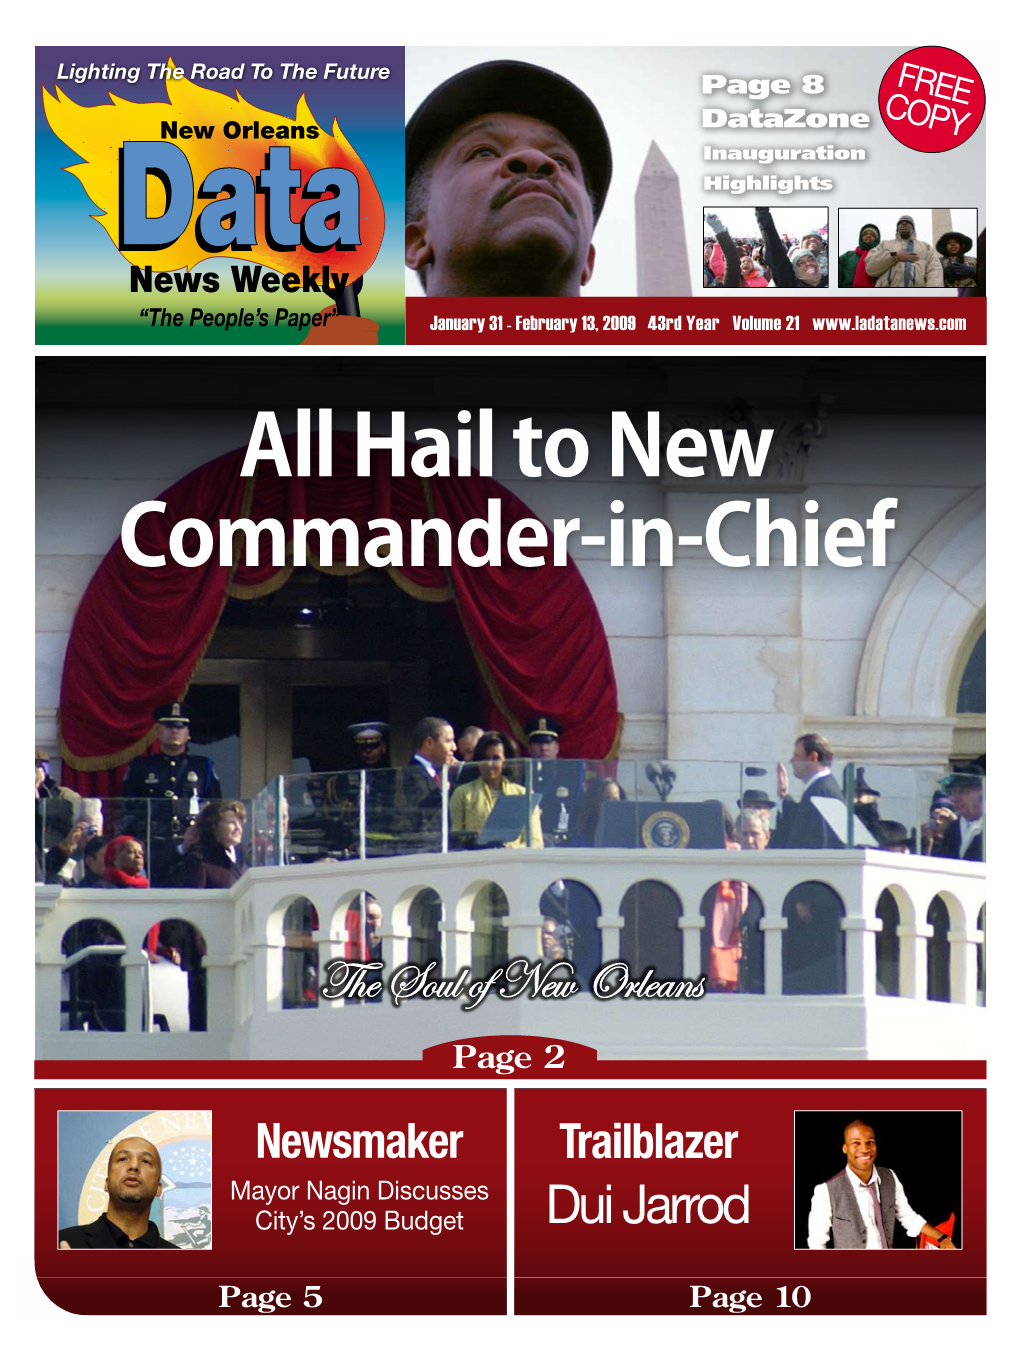 Hail to New Commander-In-Chief